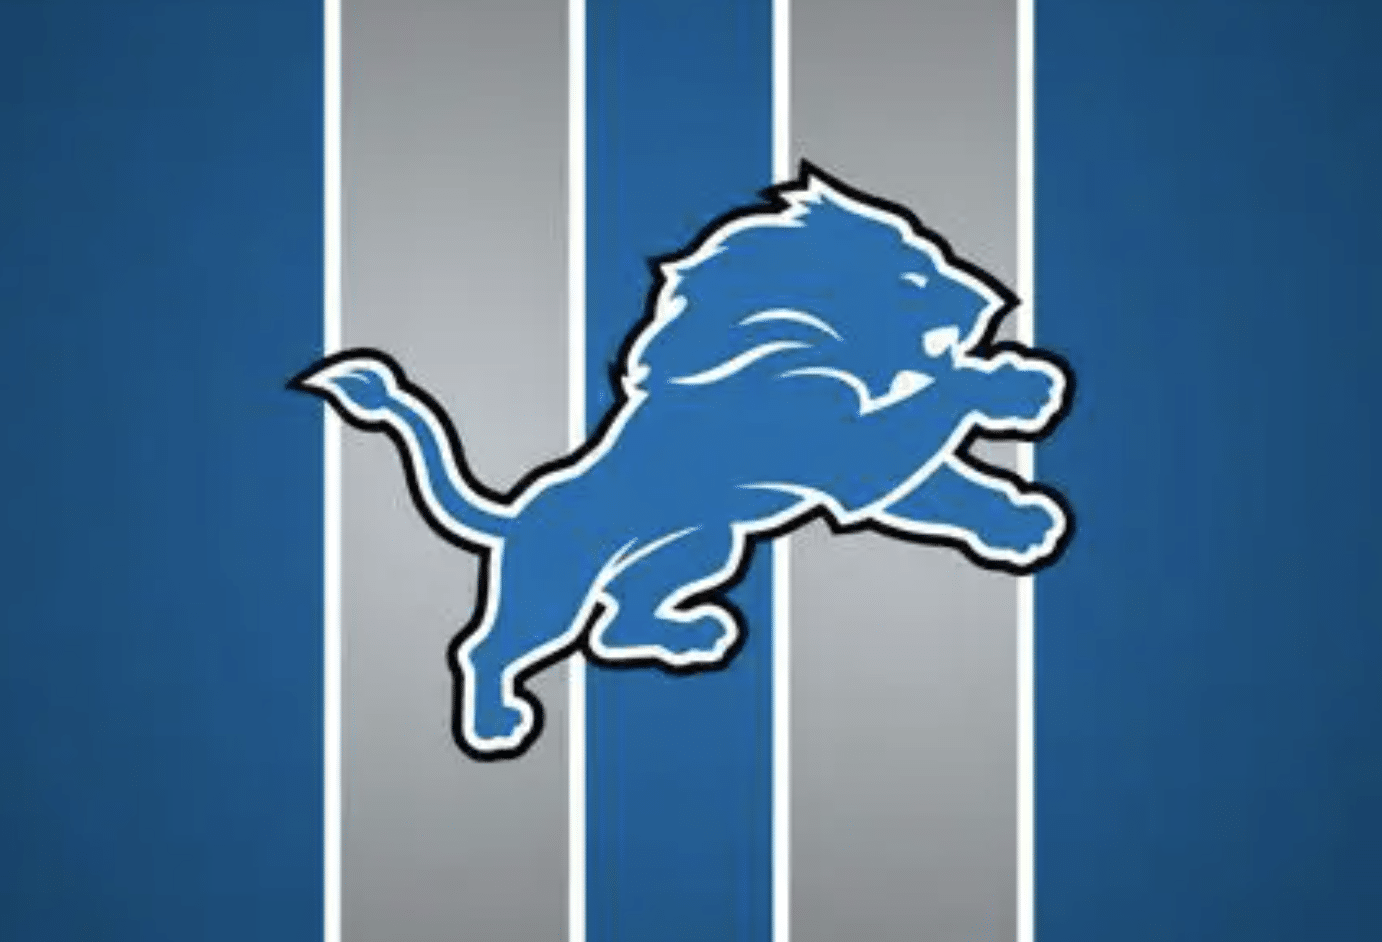 5 Detroit Lions who must ball out Detroit Lions among favorites Detroit Lions place 2 players on Injured Reserve Detroit Lions re-sign RB Devine Ozigbo